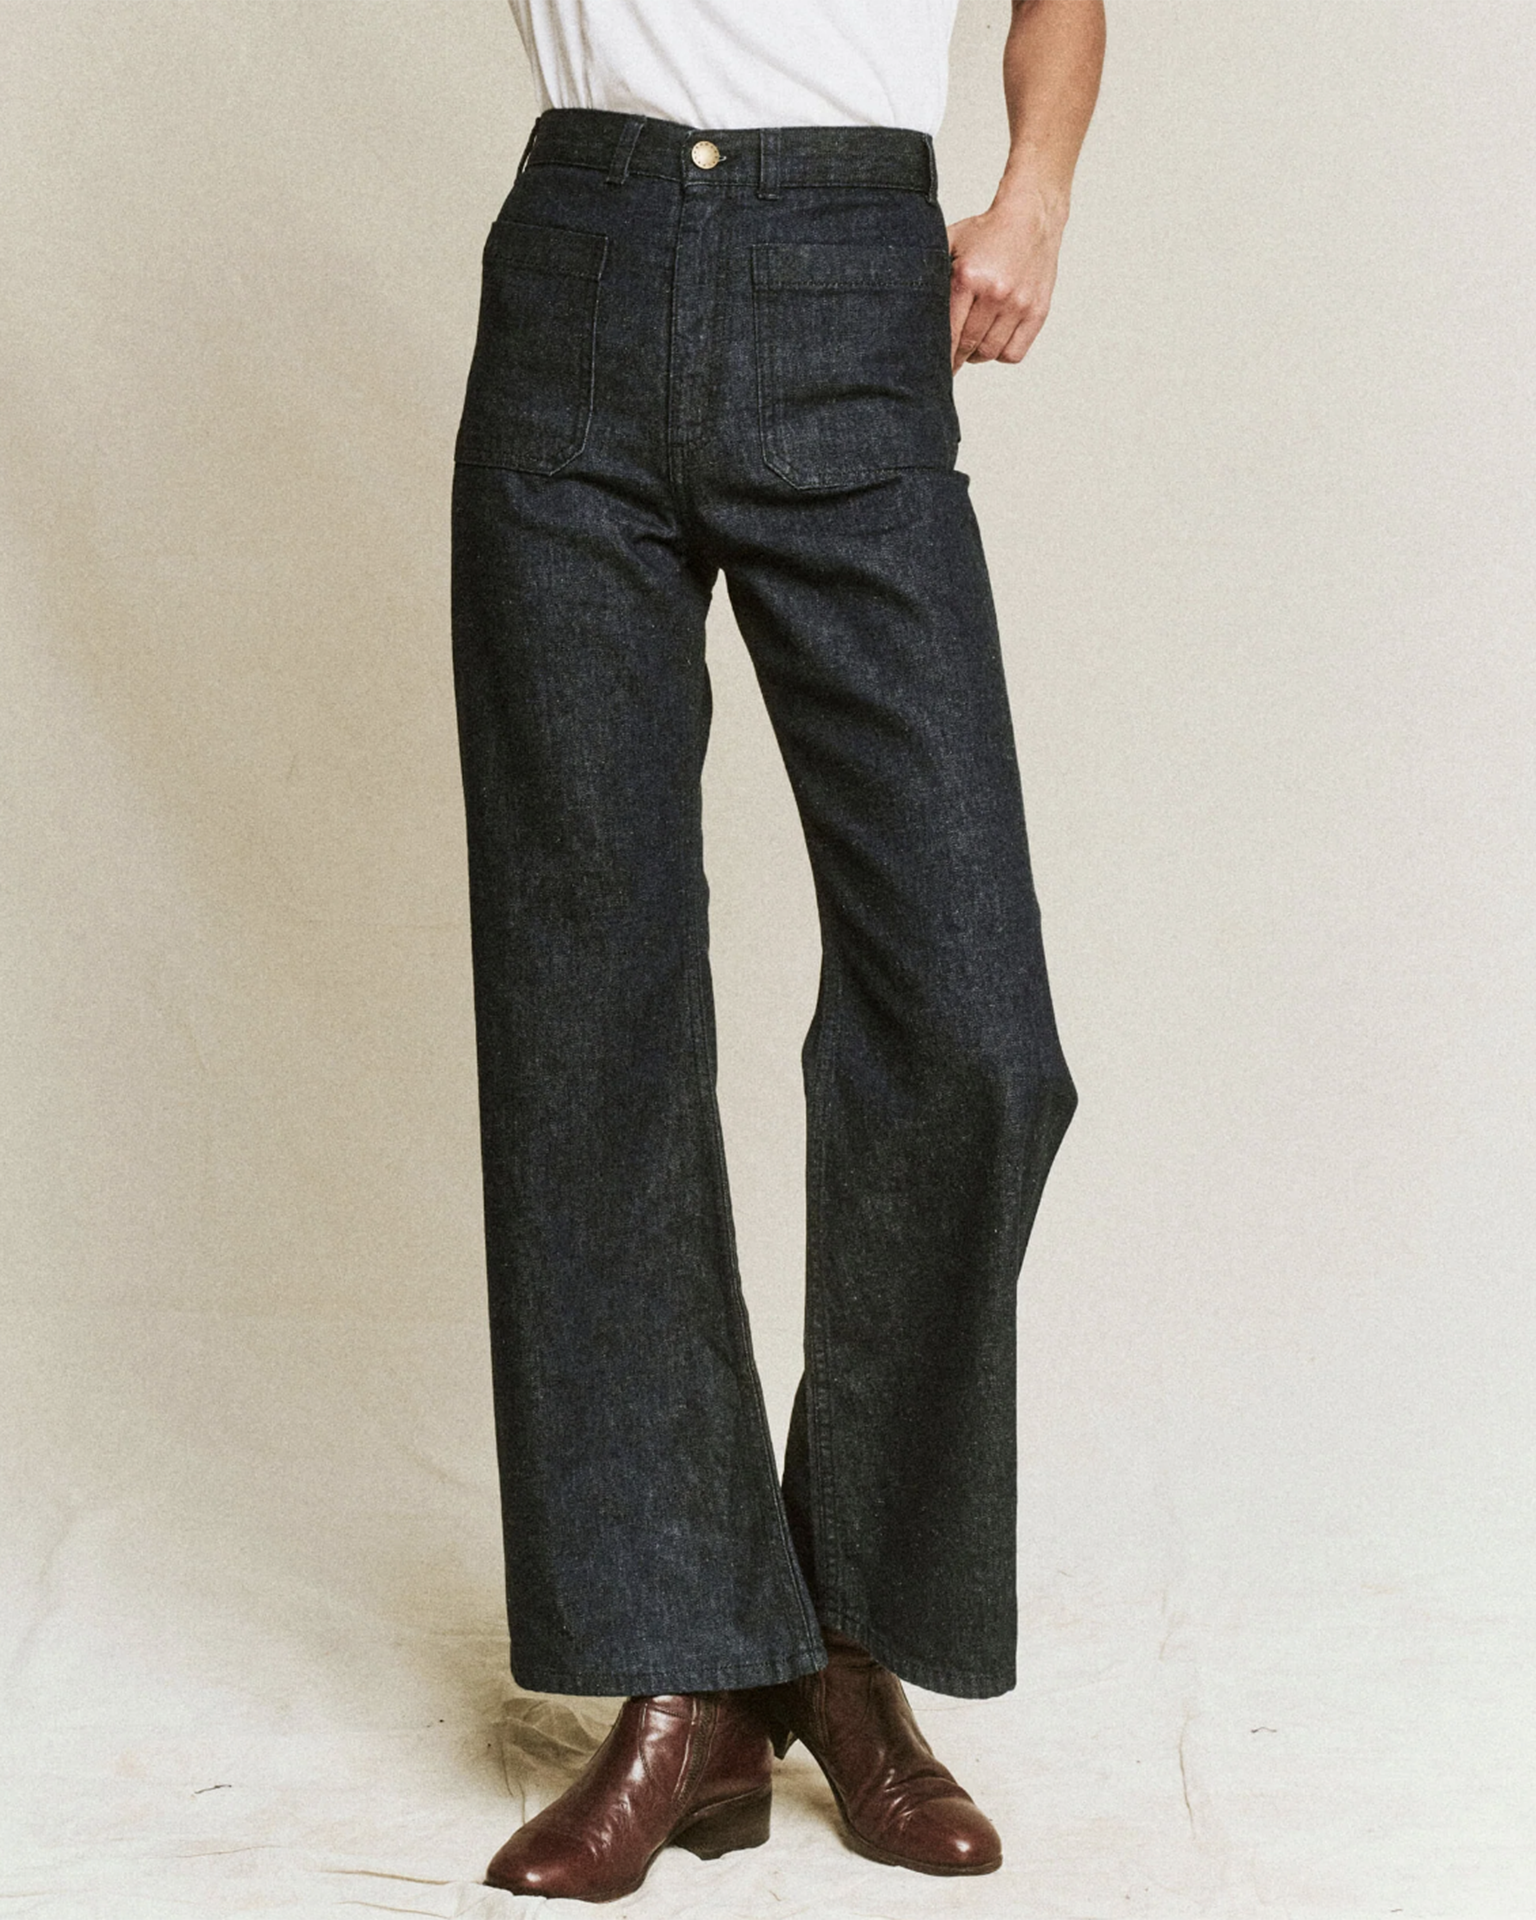 The Dock Jean in Rinse Wash